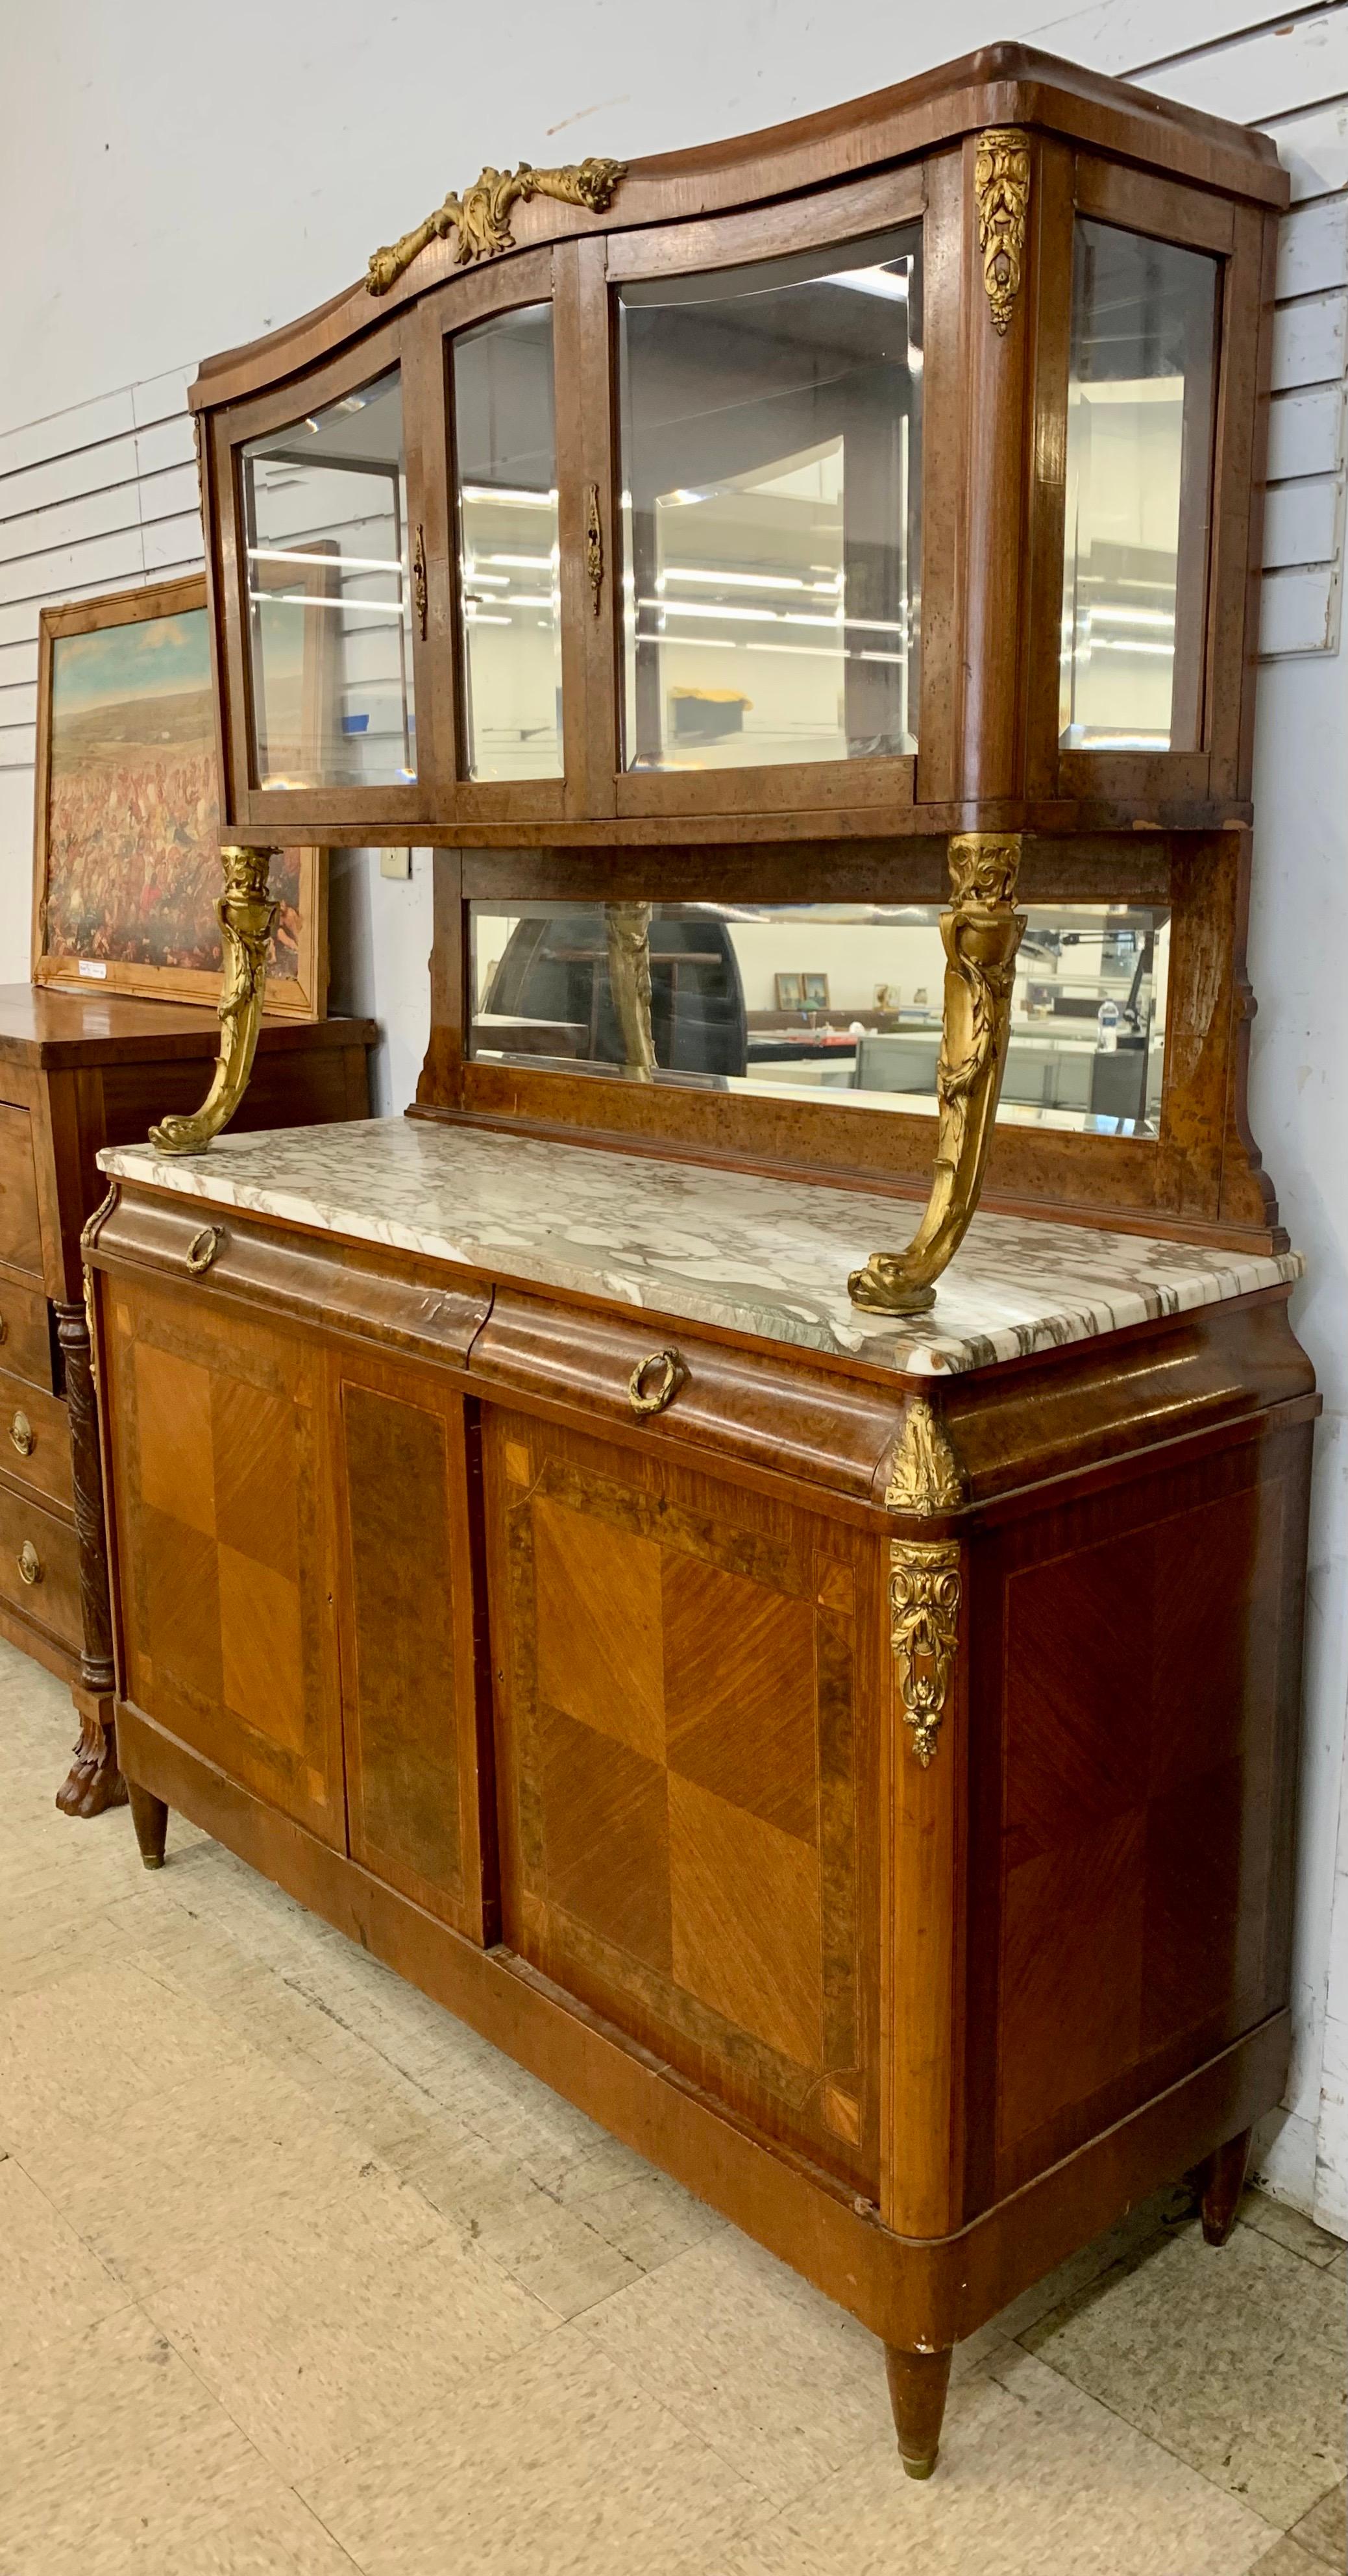 Magnificent antique French two tiered display cabinet breakfront with marble top credenza and bronze ormolu mounts and supports. The piece consists of a vitrine mounted on to a bottom cabinet which features parquetry on the two front doors that open